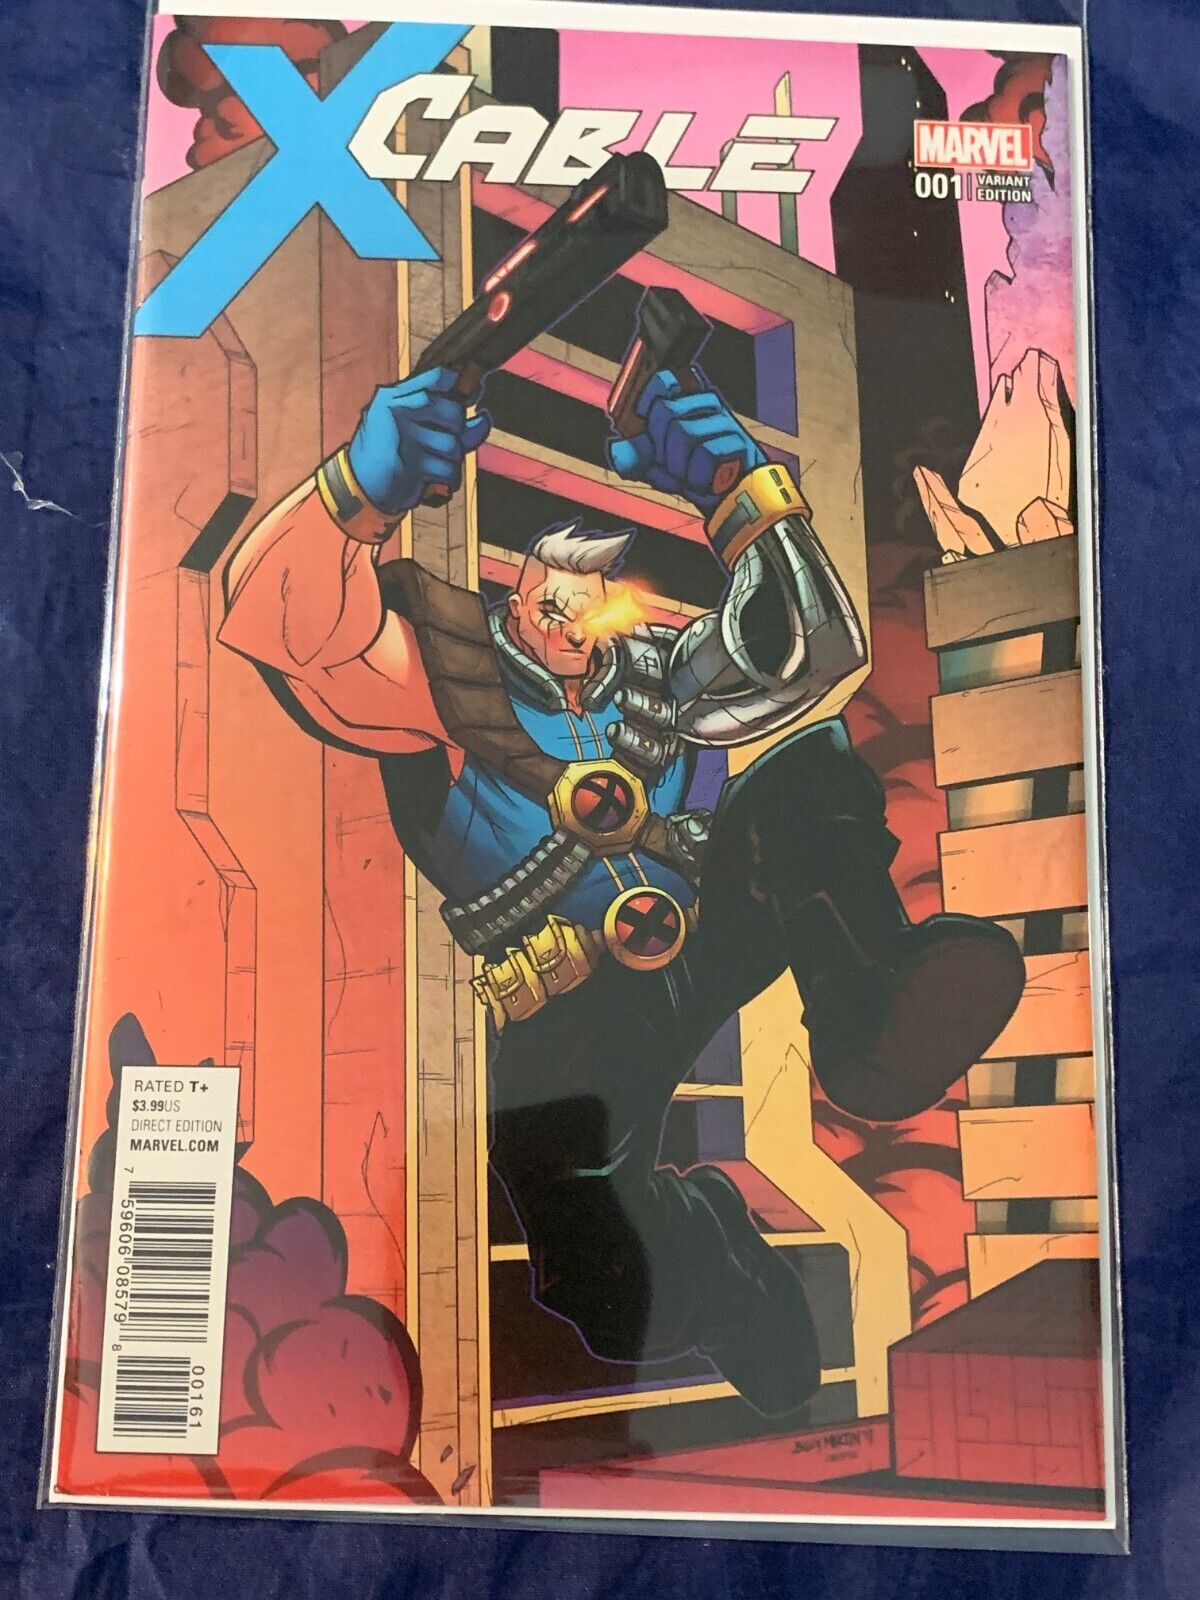 CABLE #1 NM MARTIN RETAILER INCENTIVE VARIANT - MARVEL 2017